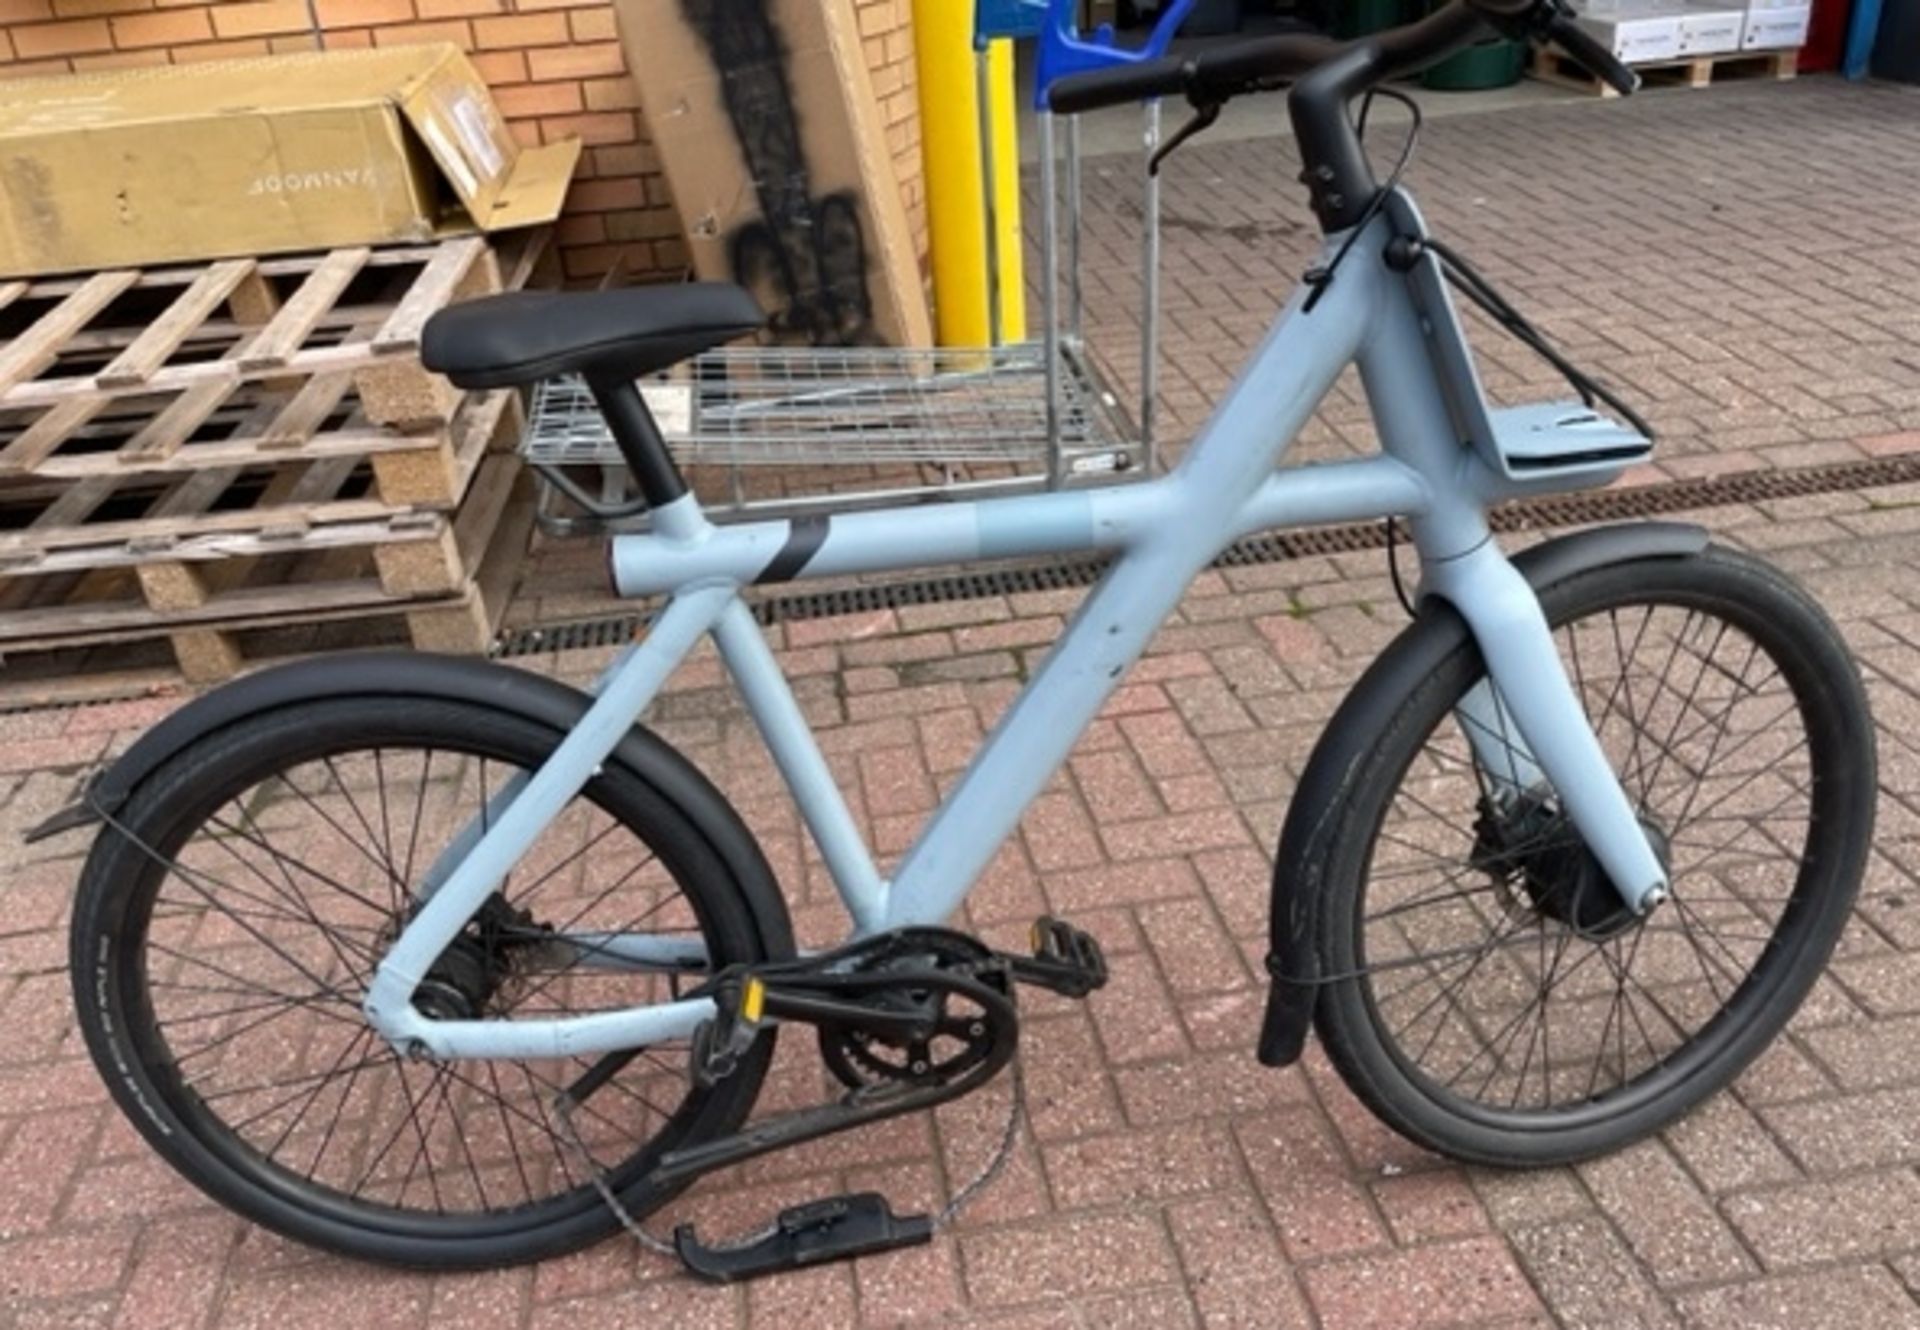 VanMoof X3 Light Bike – For Spares (Location Park Royal. Please See General Notes) - Image 2 of 2